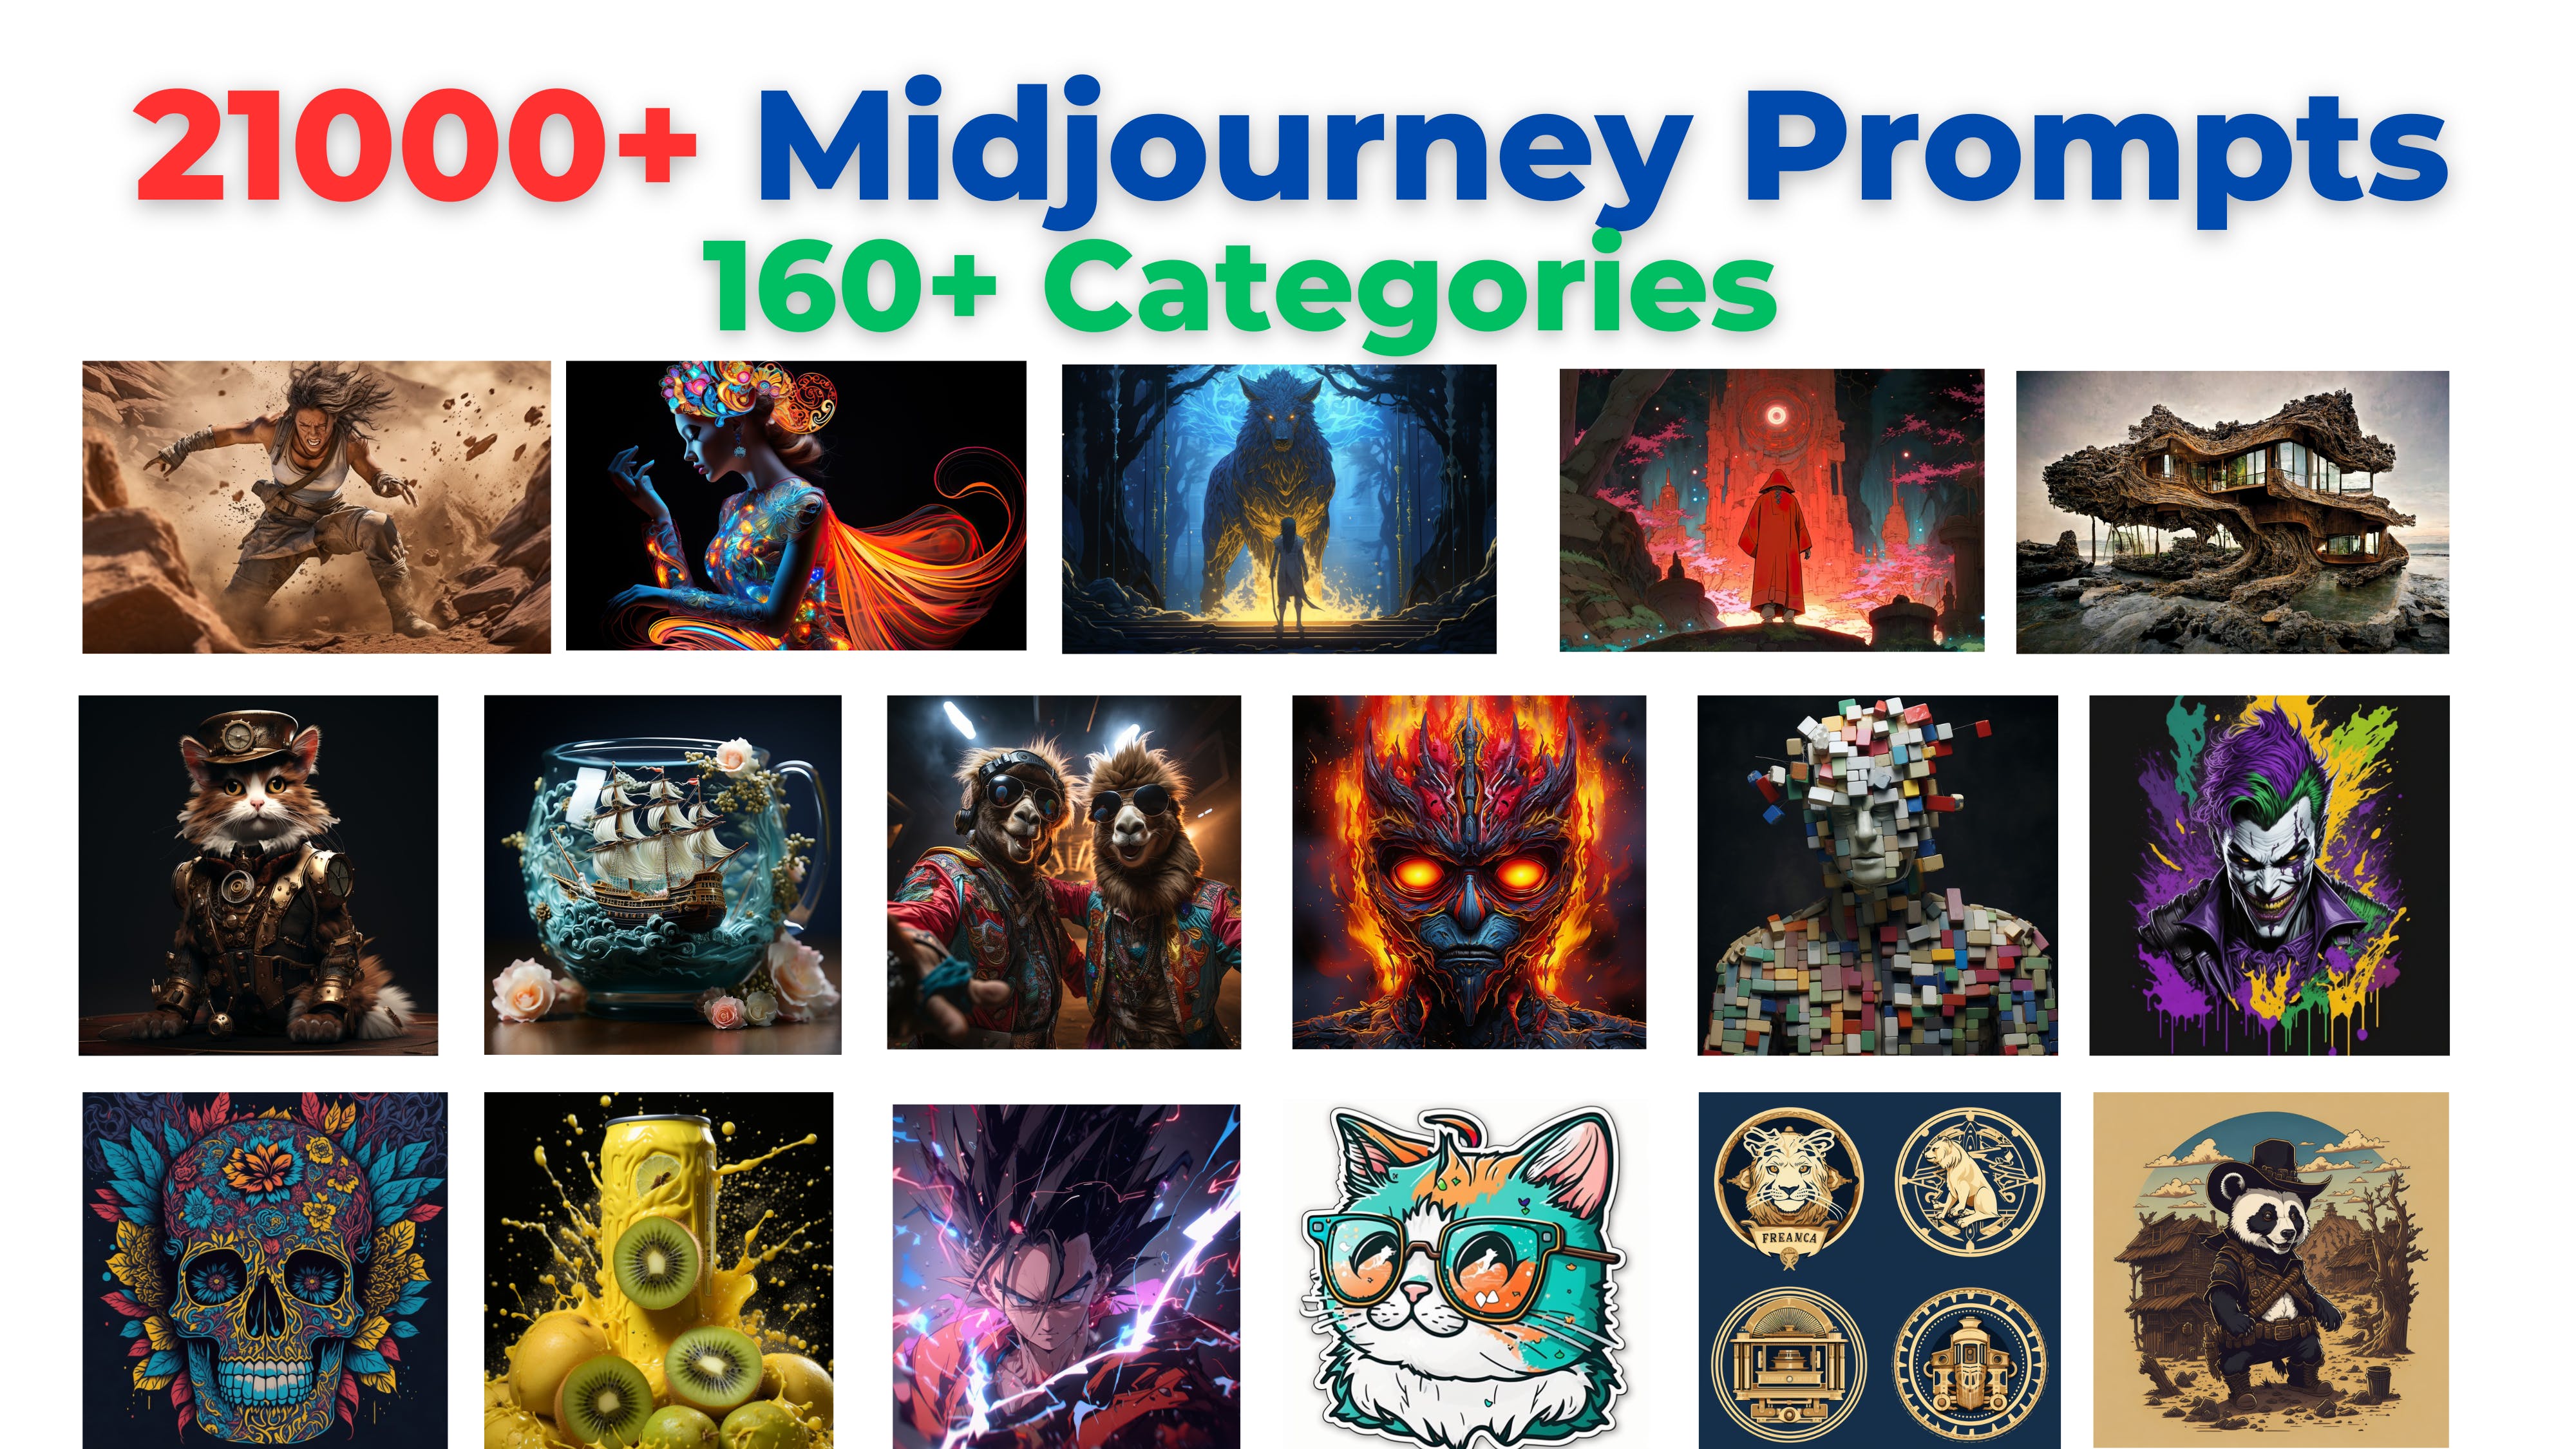 21,000+ Midjourney Prompts & Guide media 1